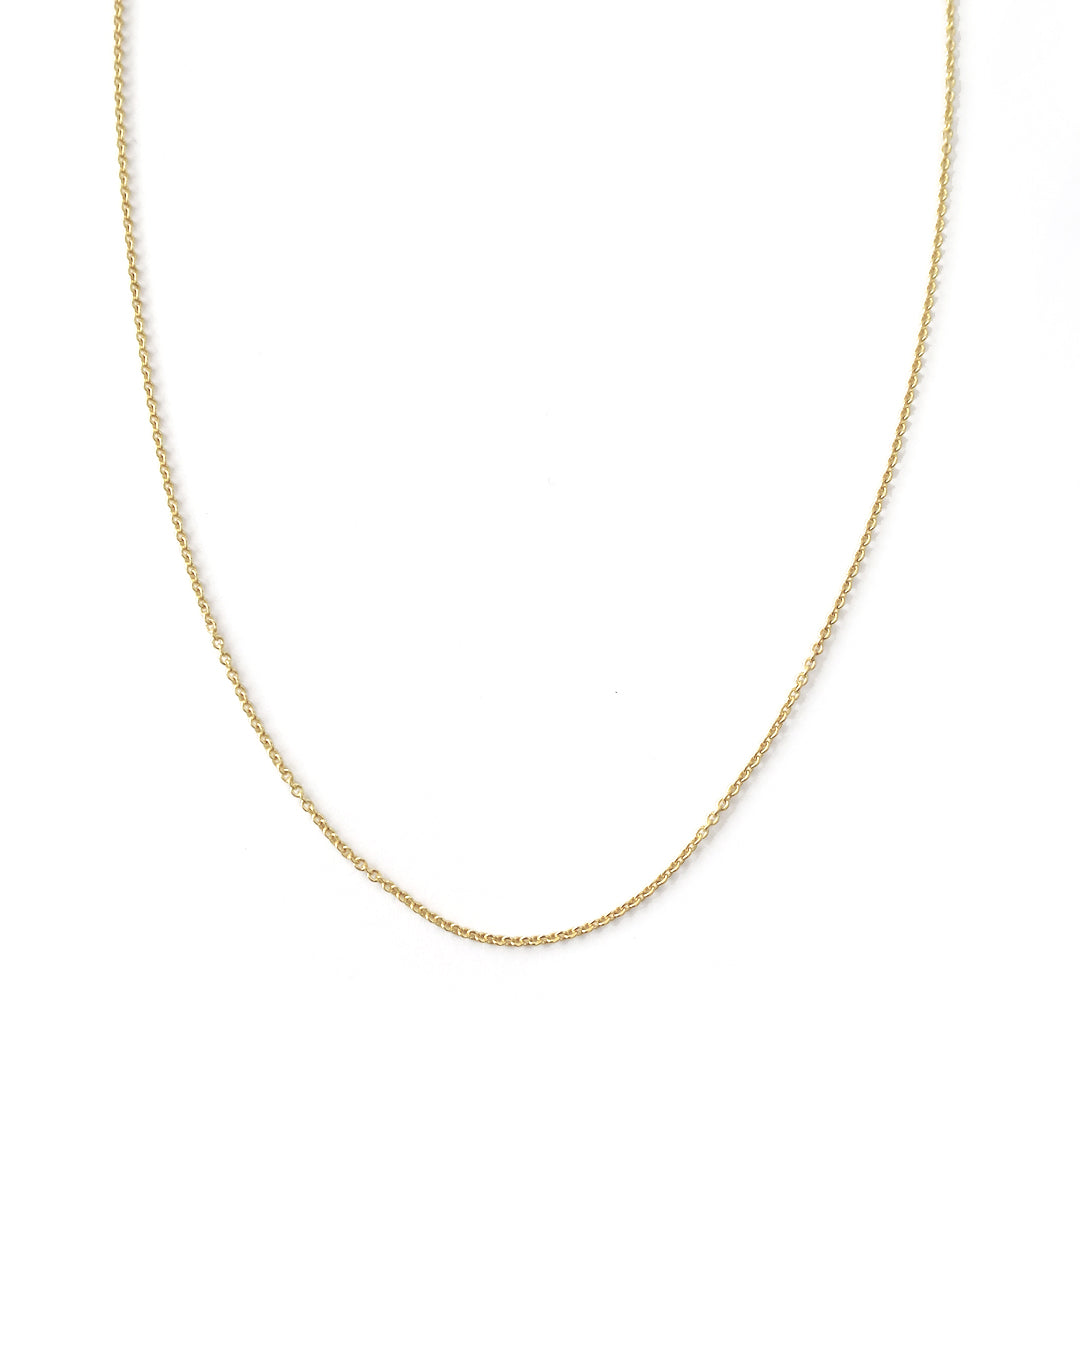 ANCHOR NECKLACE - Solid gold